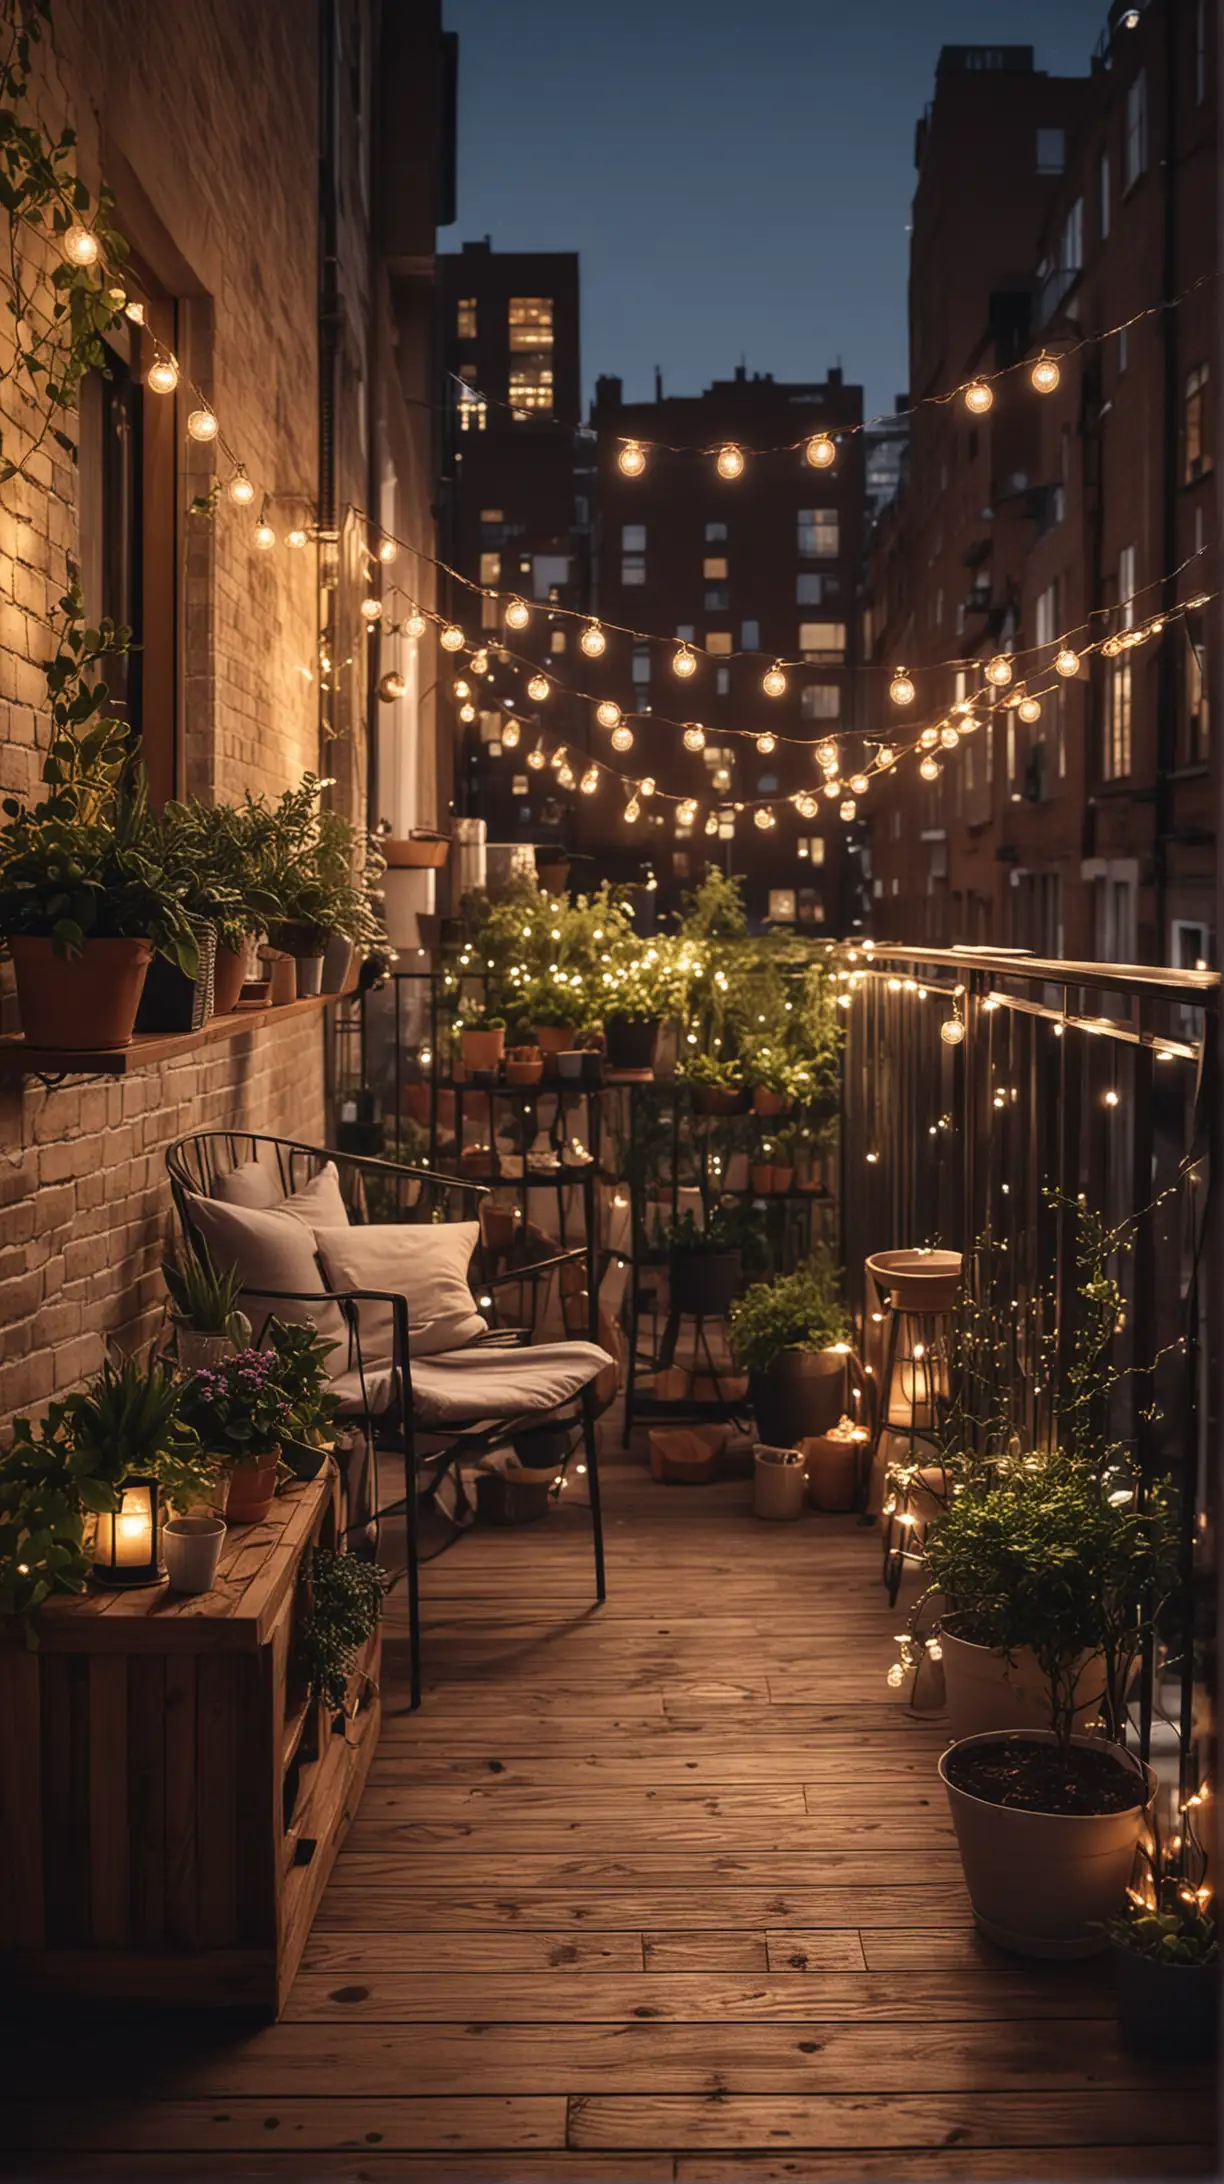 An urban balcony at dusk, enhanced with twinkling string lights and soft glowing lanterns, creating a warm and inviting atmosphere.